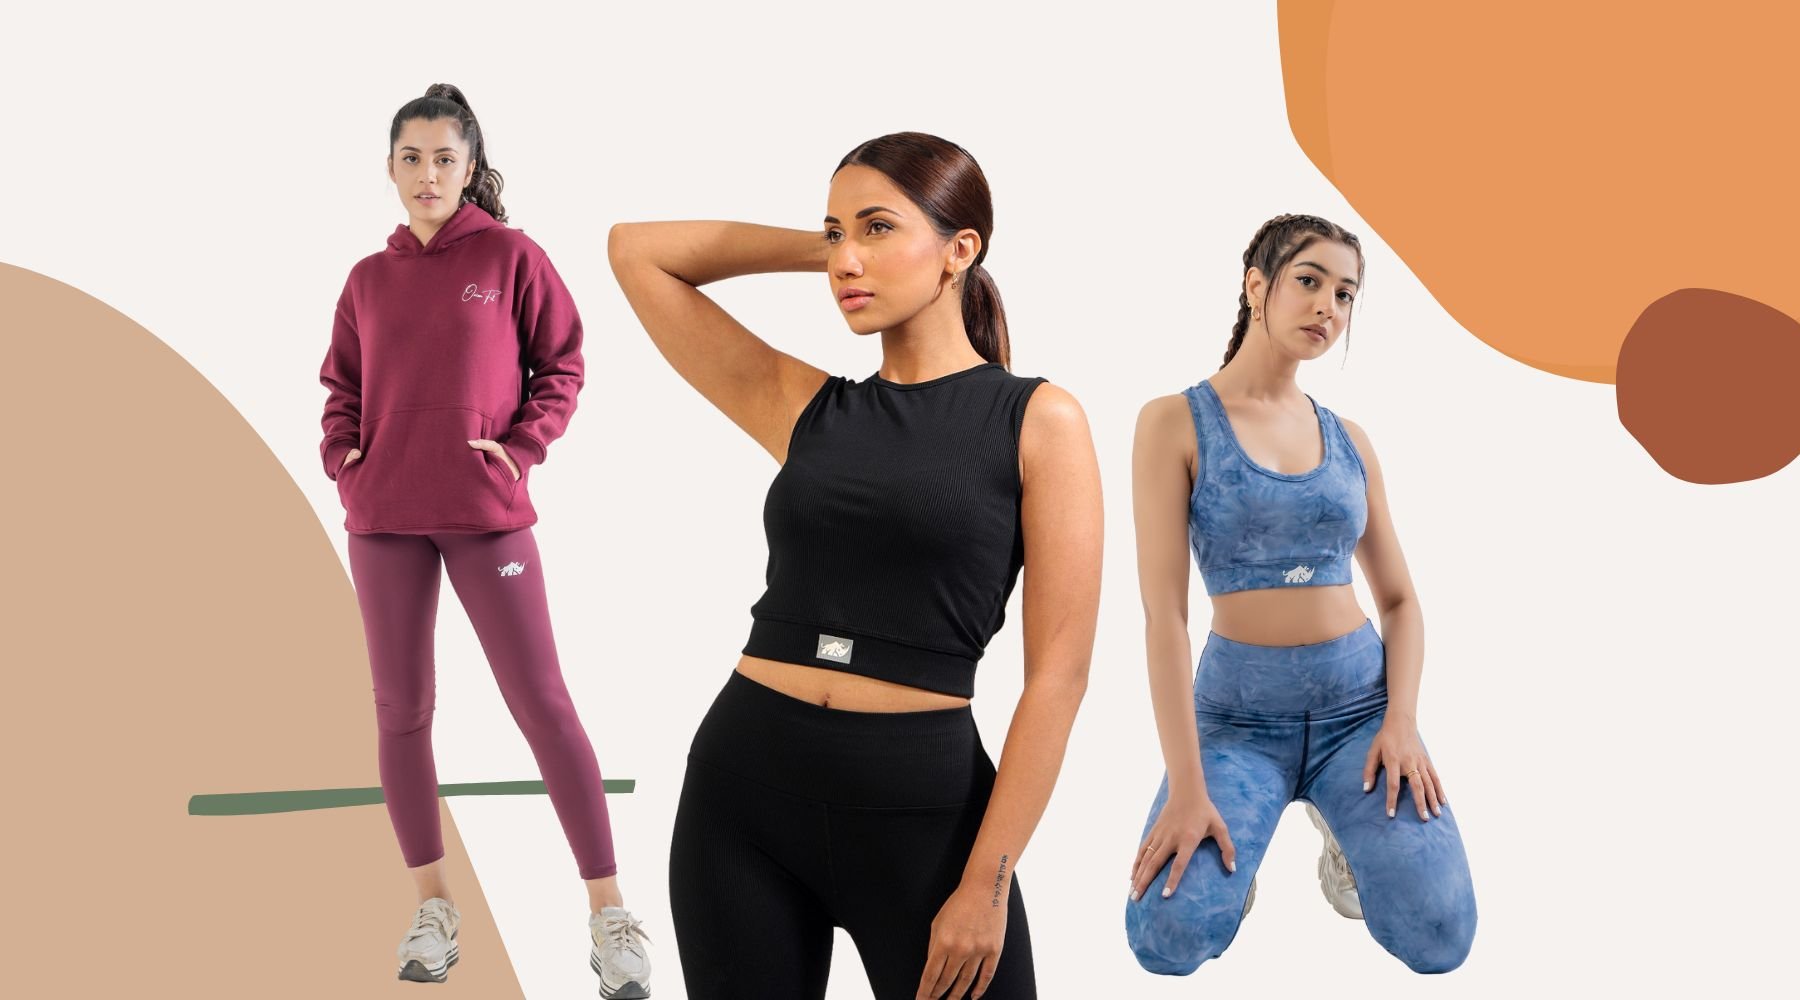 Women Gym Sets - The Orion Fit